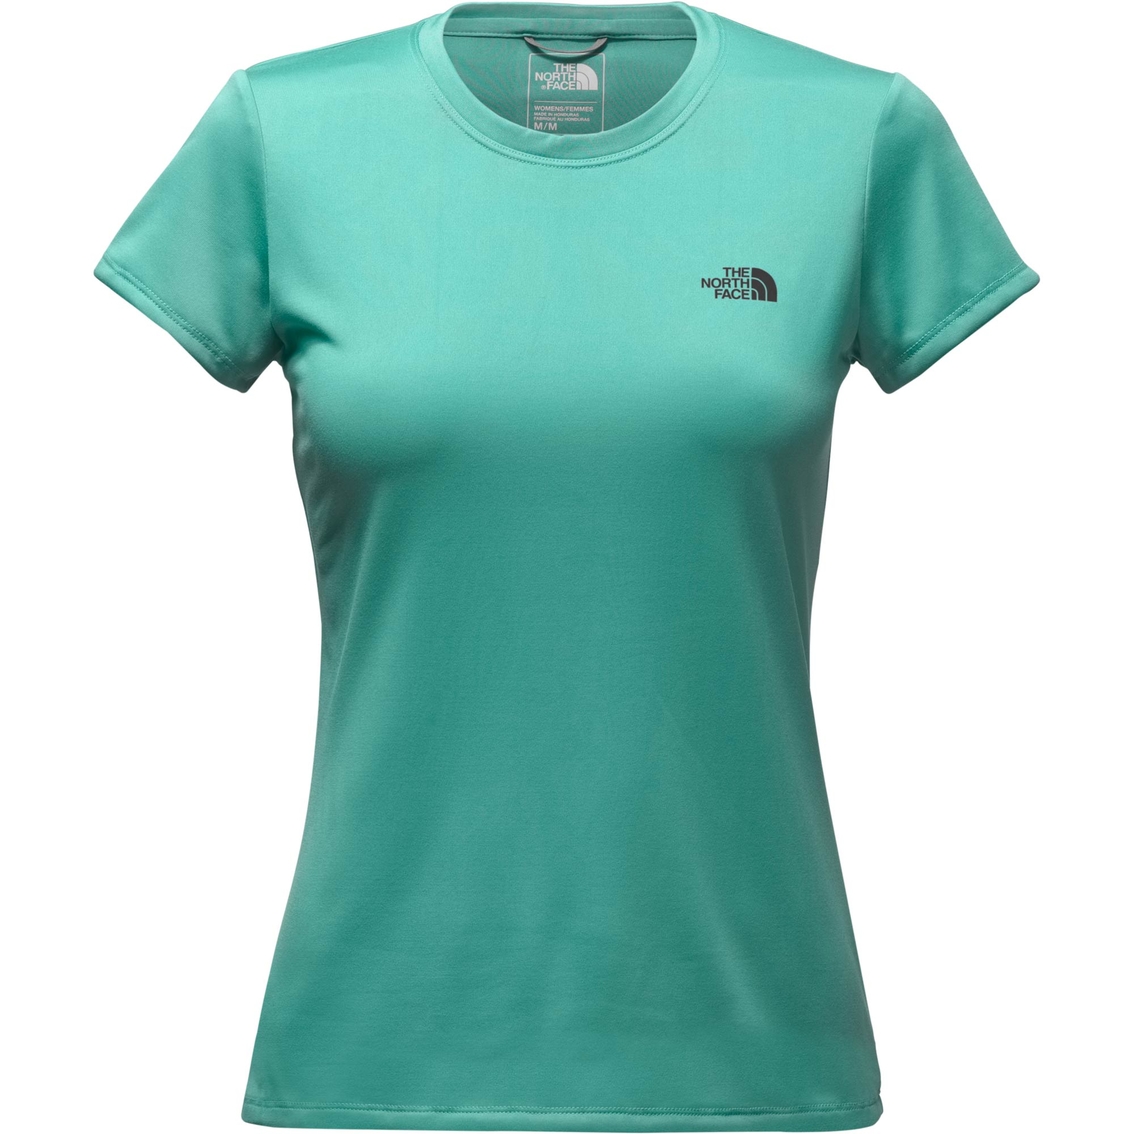 The North Face Womens Reaxion Amp Crew Tee | Tops | Clothing & Accessories  | Shop The Exchange